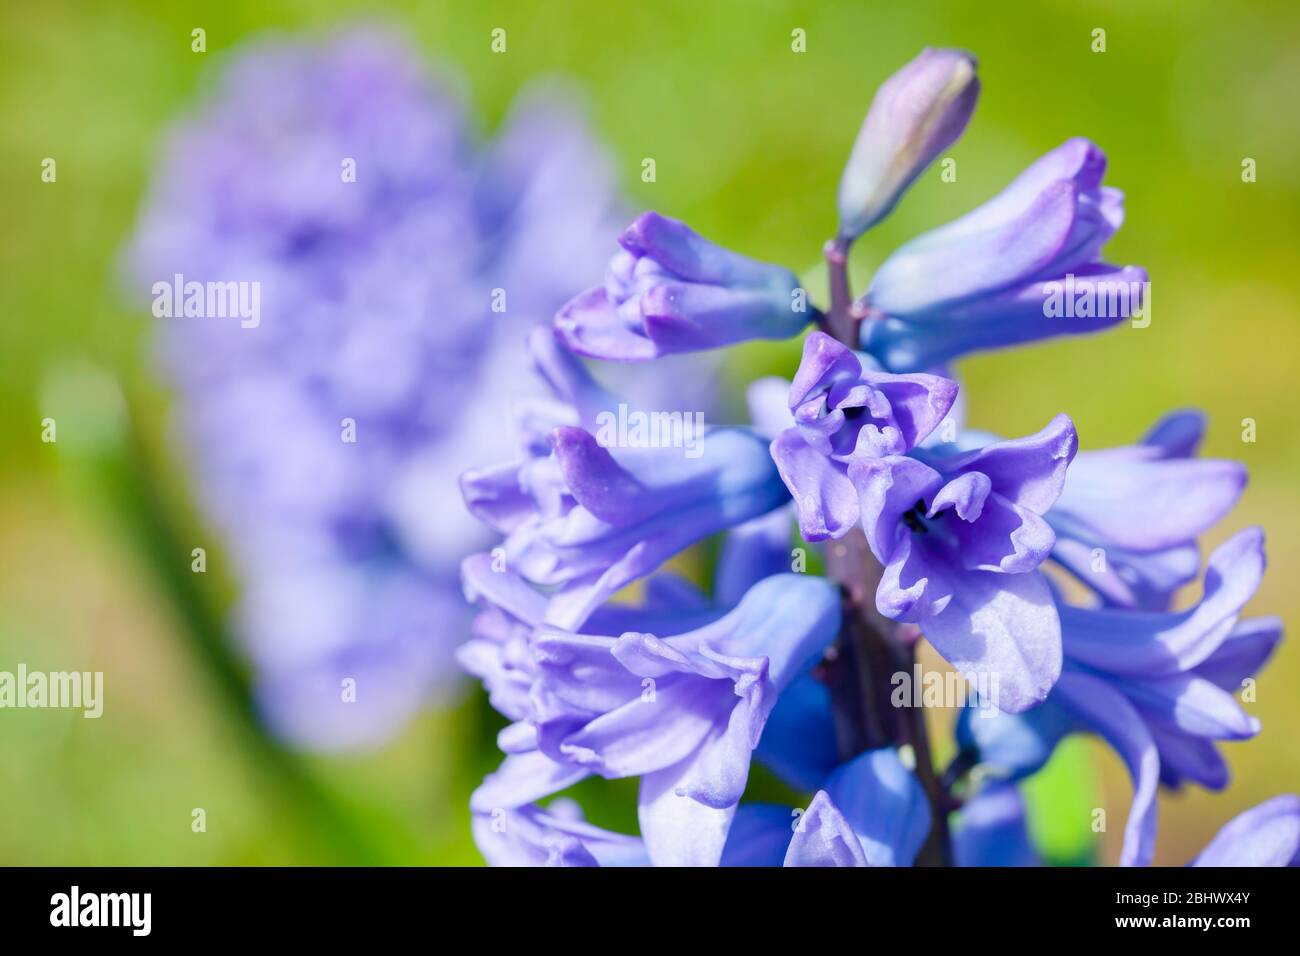 Hyacinths flowers macro photo. Hyacinthus is a small genus of bulbous, fragrant flowering plants in the family Asparagaceae, subfamily Scilloideae Stock Photo